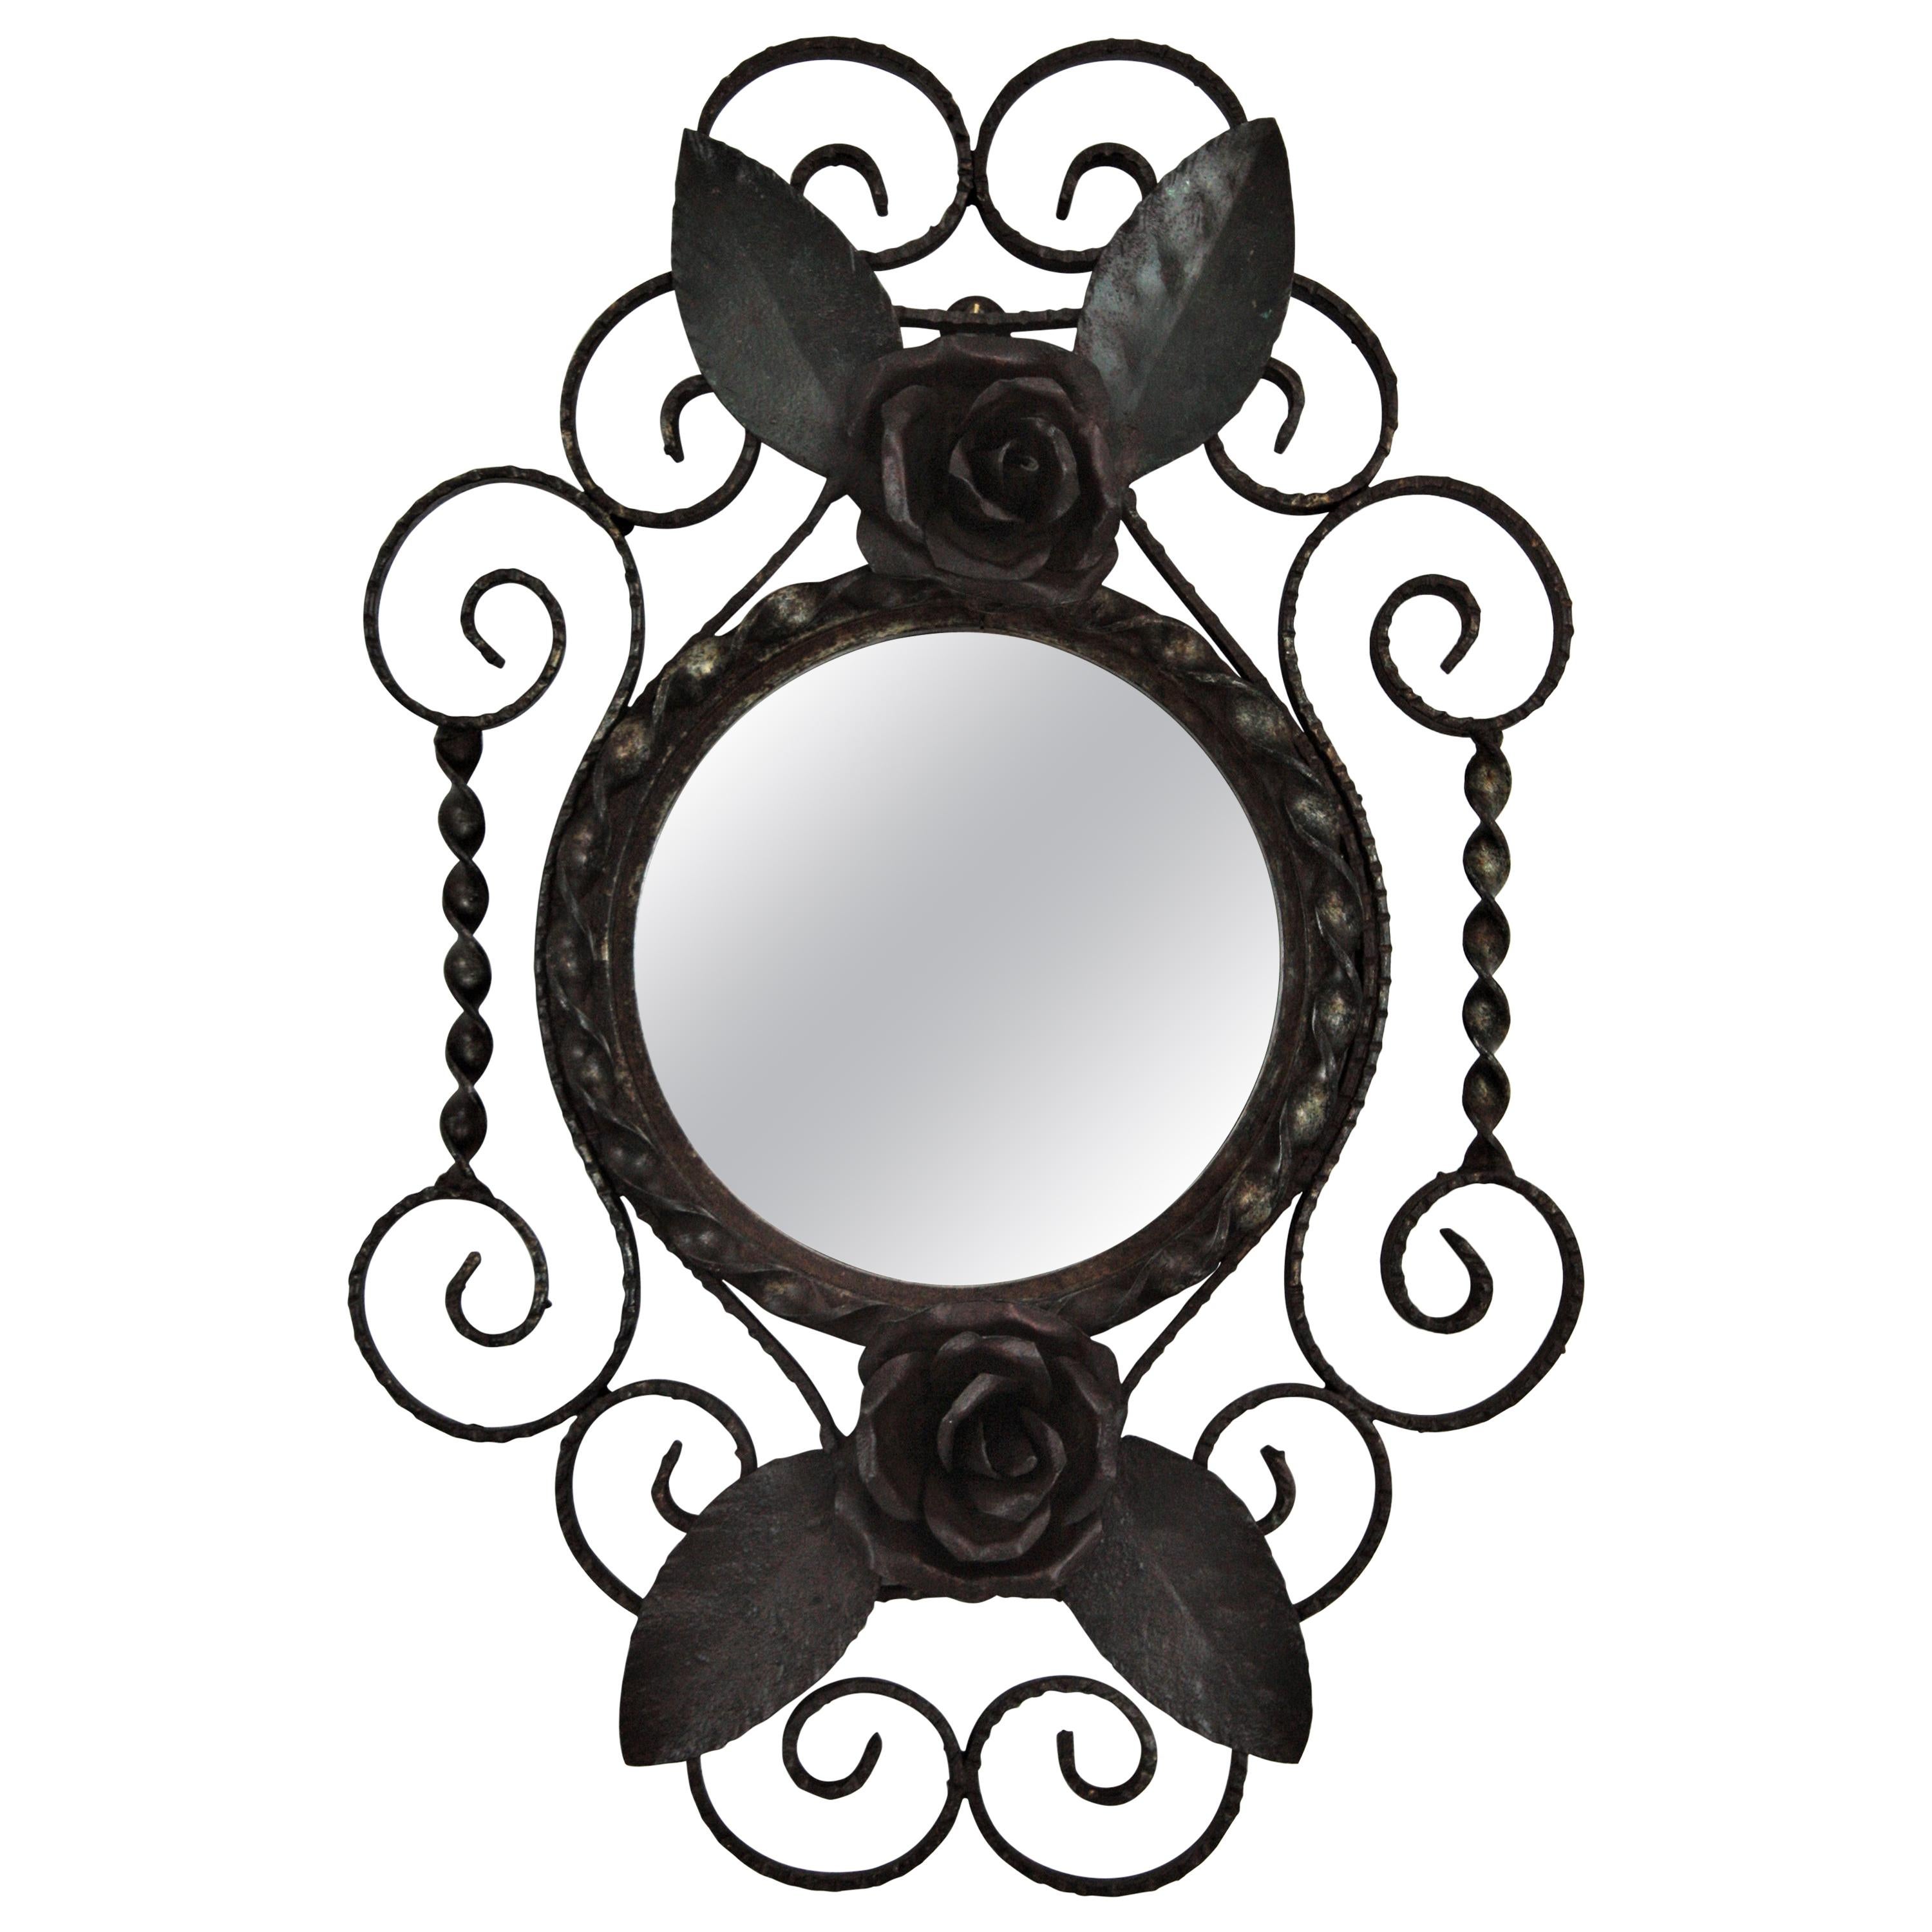 French 1940s Wrought Iron Mirror with Floral Scrollwork Frame